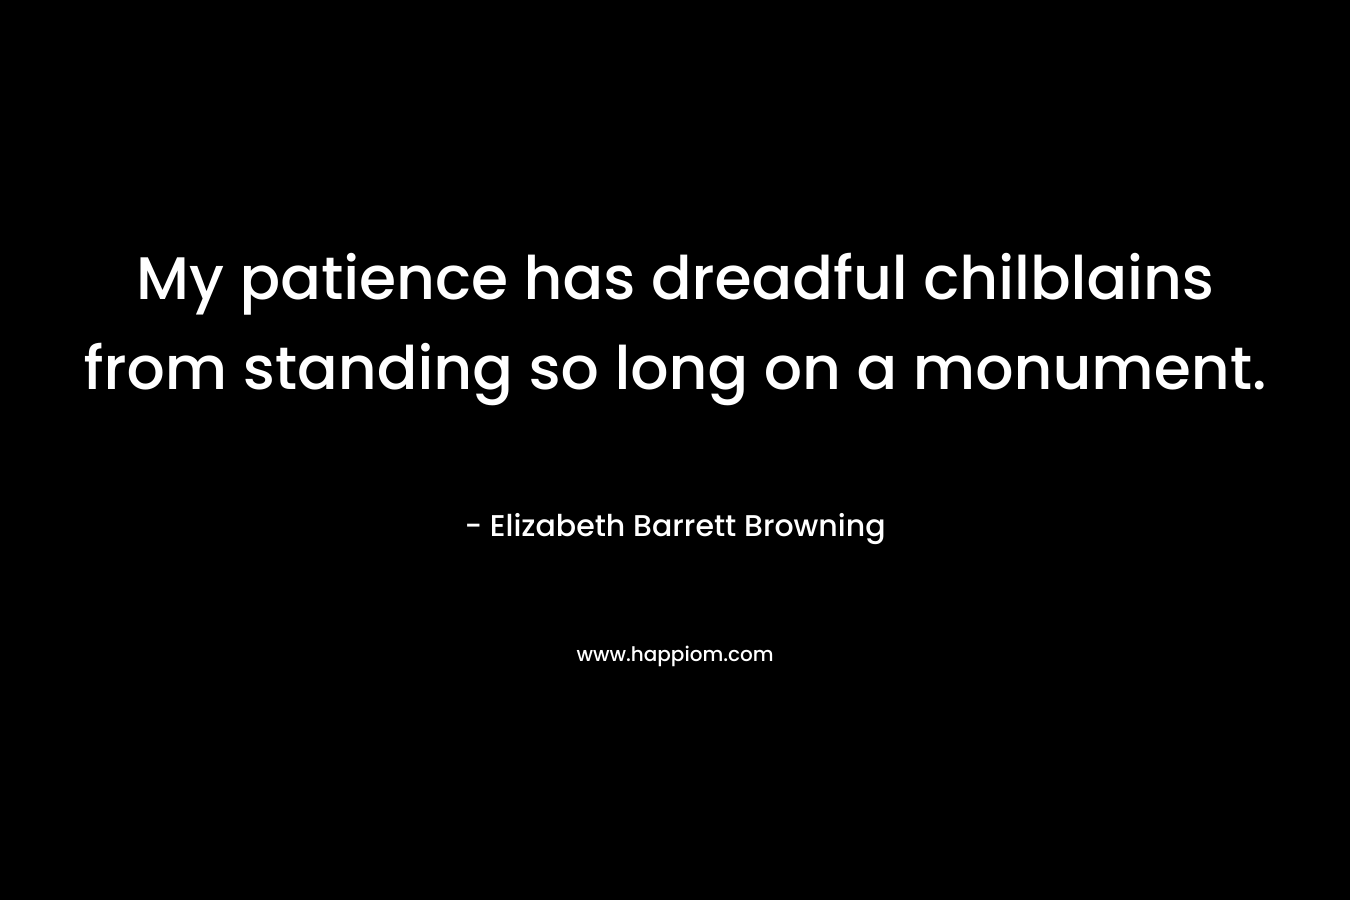 My patience has dreadful chilblains from standing so long on a monument. – Elizabeth Barrett Browning